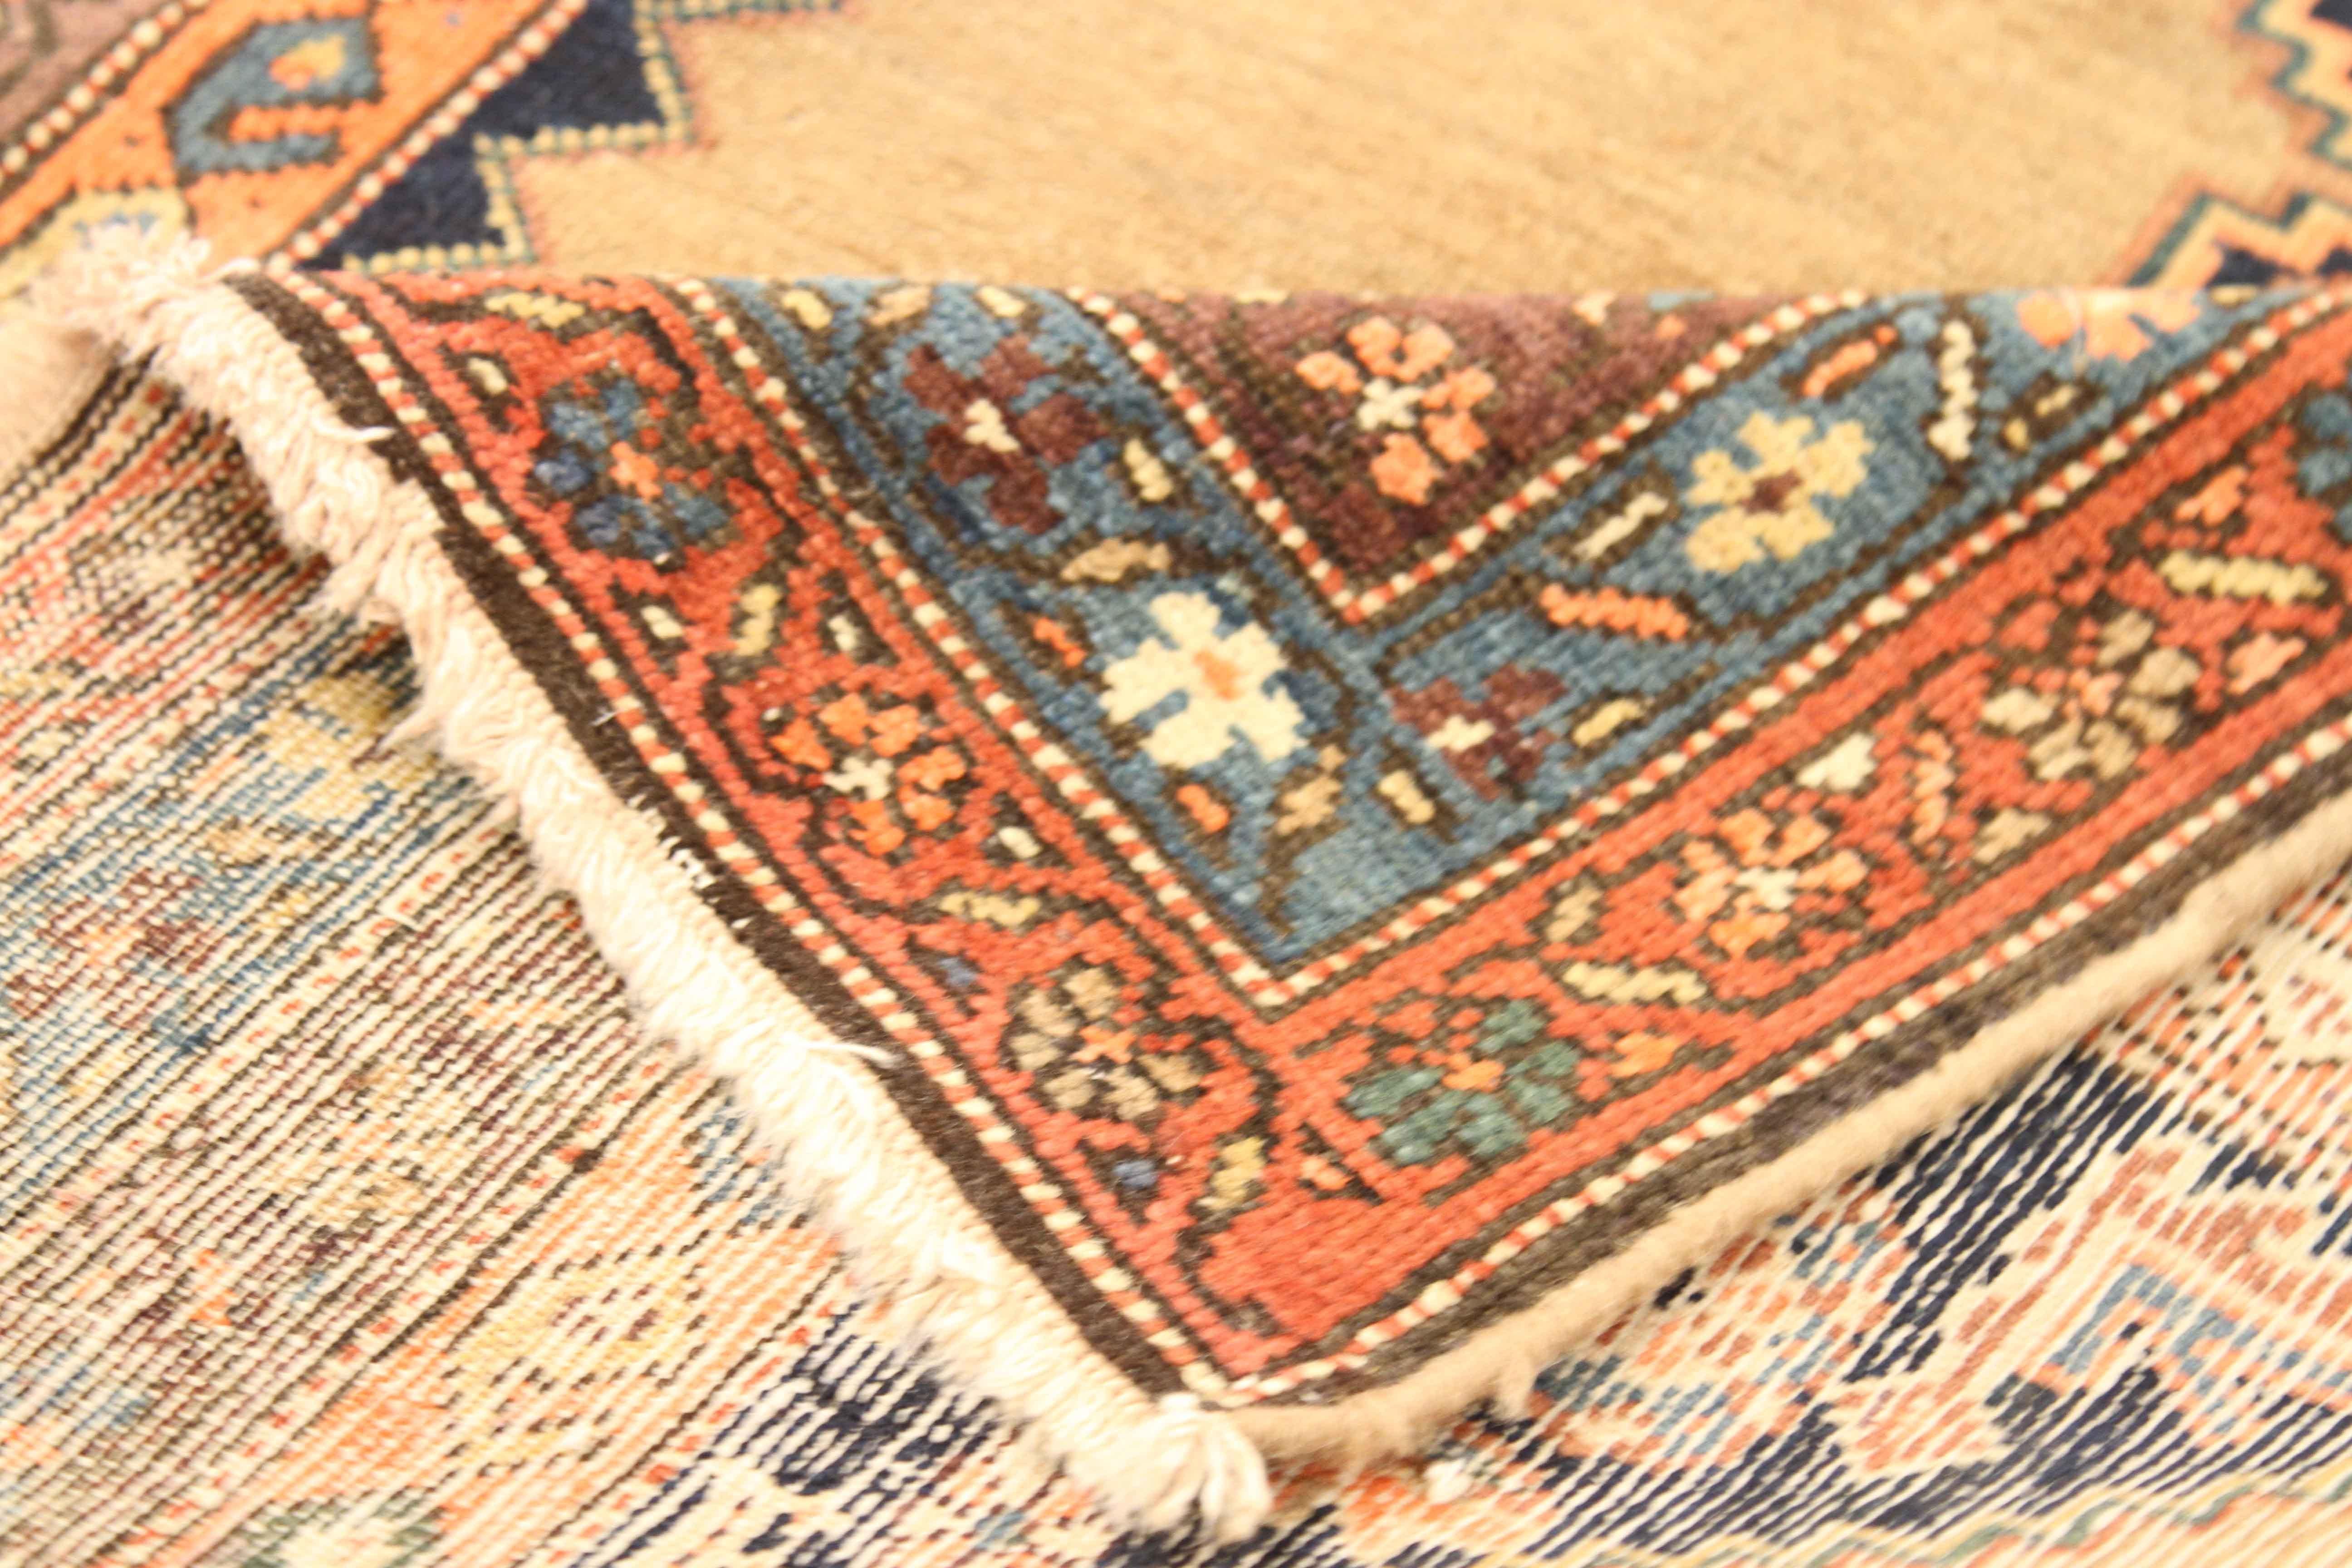 Crafted by hand using the highest quality of wool and natural dyes, this antique Persian rug features intricately-designed medallions bordered by repeating floral patterns. Made popular by Malayer weavers, this style is a great fit for modern,